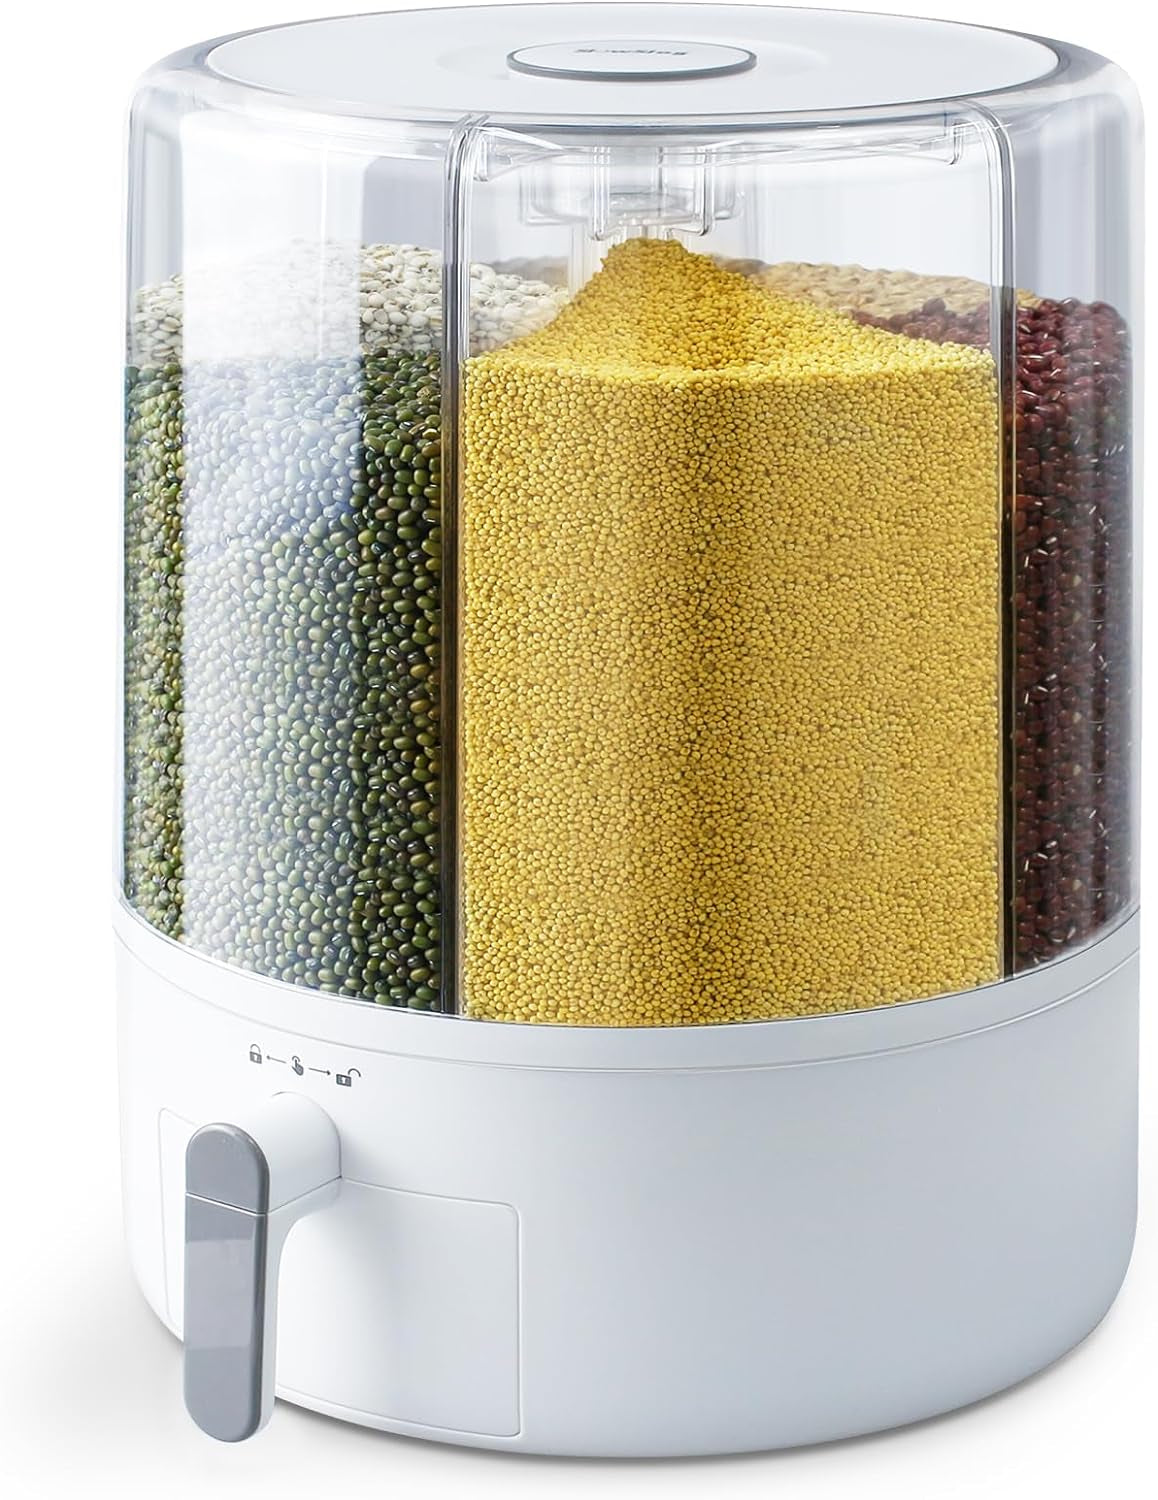 Grain Dispenser, Grain and Rise Storage Container Kitchen, 360° Rotating Rice and Grain Dispenser, Cereal Dispenser, Rotating Dry Food Dispenser for Lentils, Small Beans, Barley, Millets